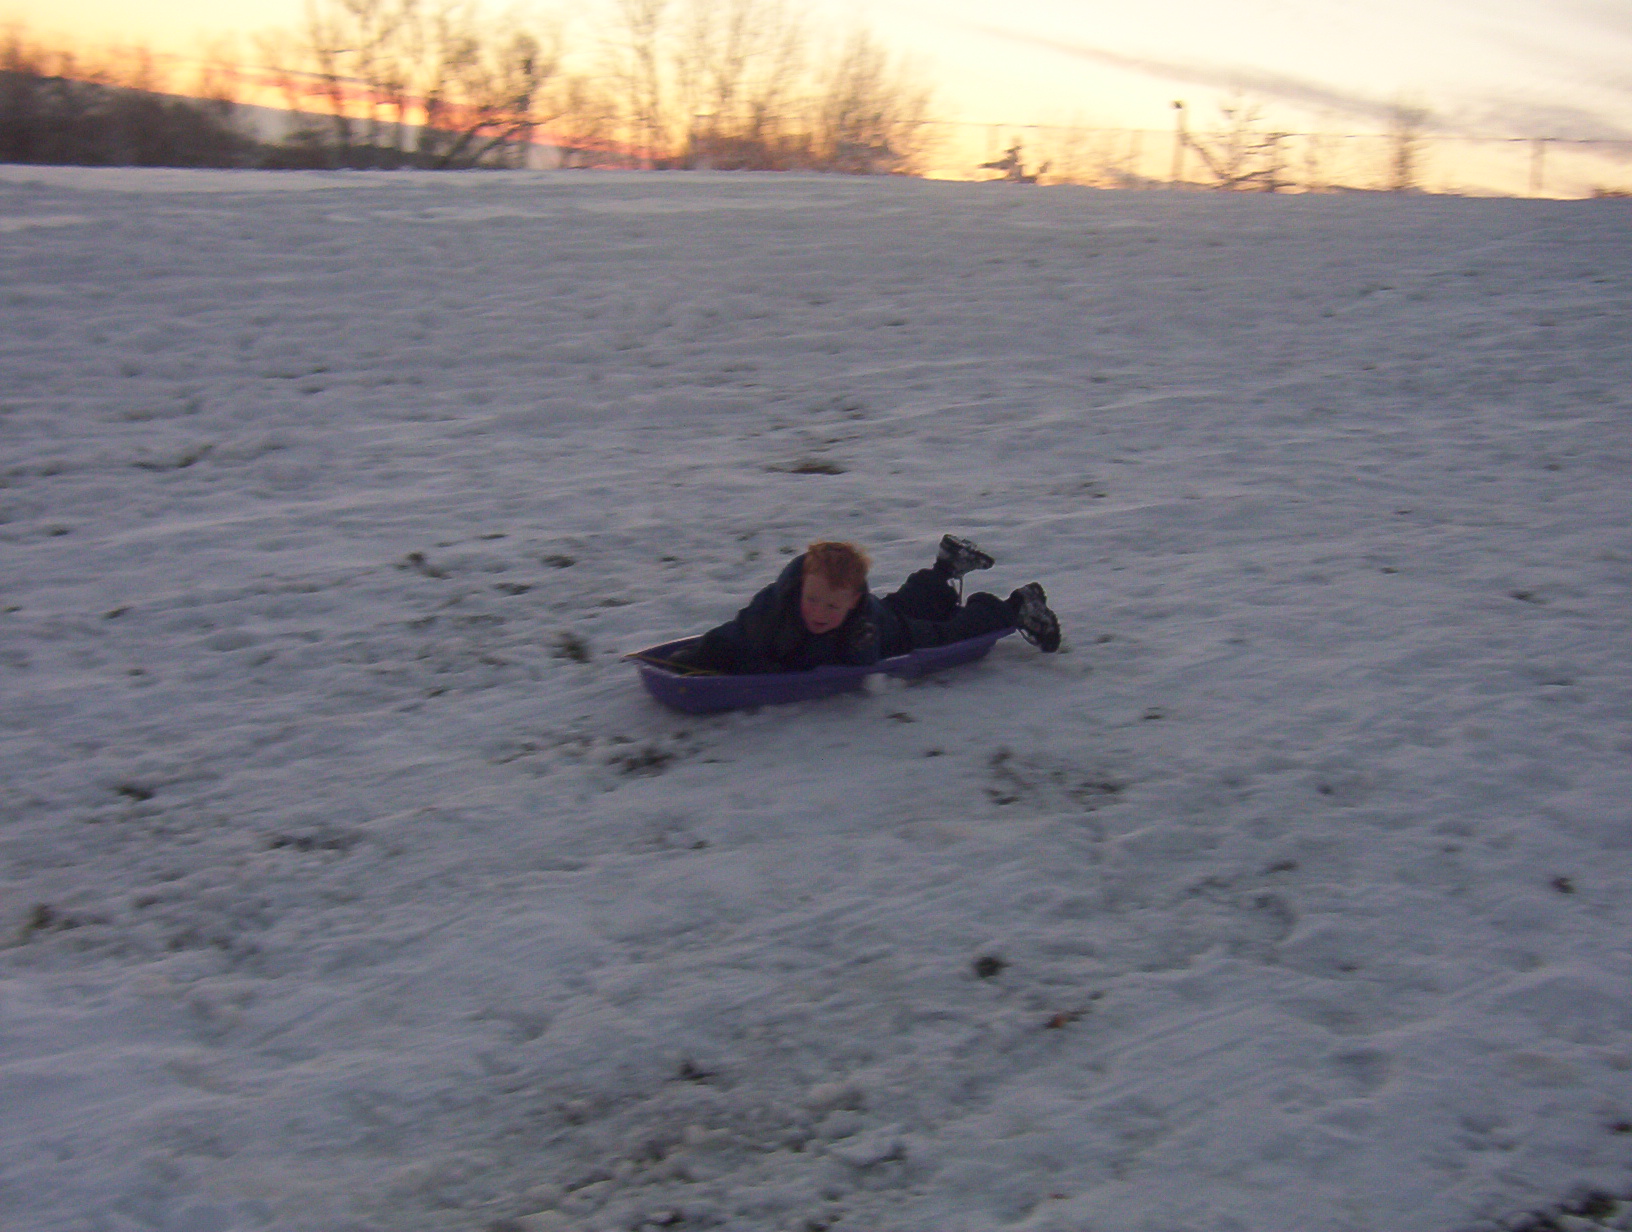 the child is laying on his stomach on a small snow sled